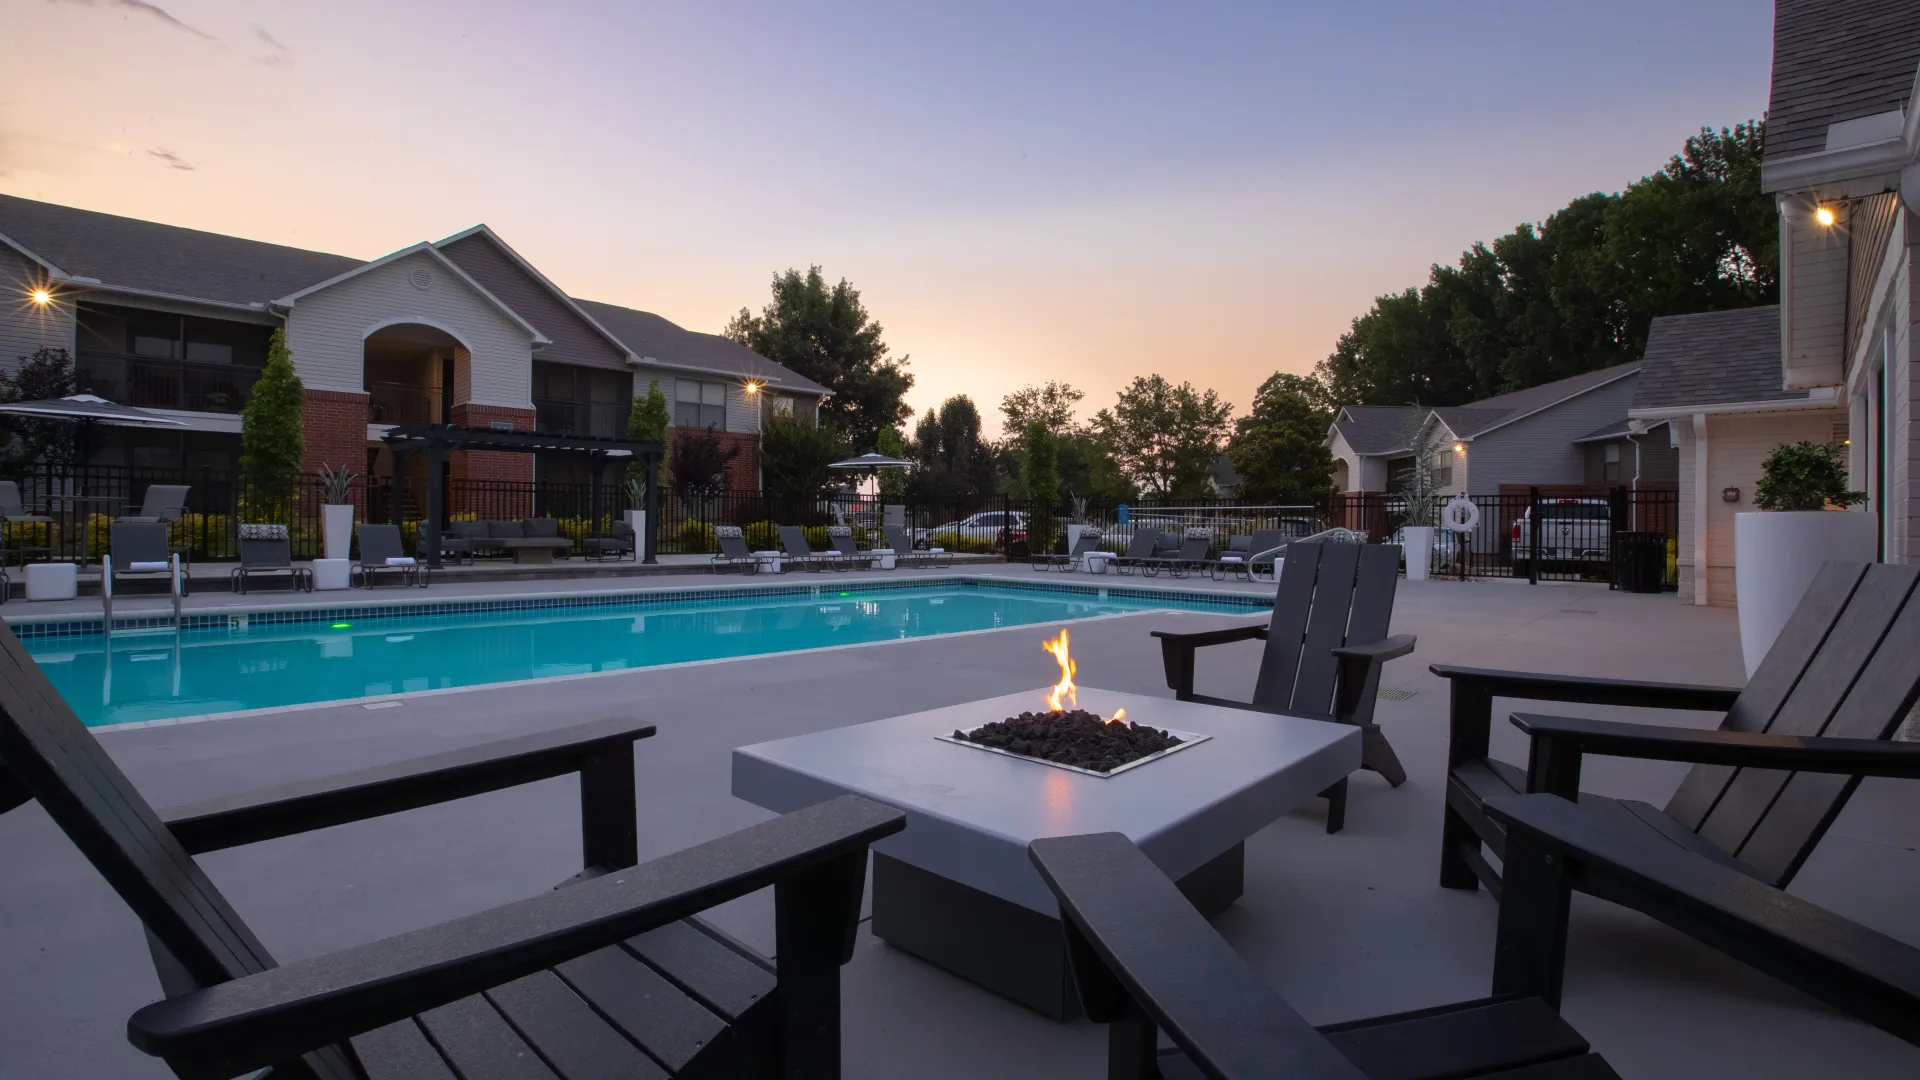 Pool area at sunset with a lit fire pit and Adirondack chairs.